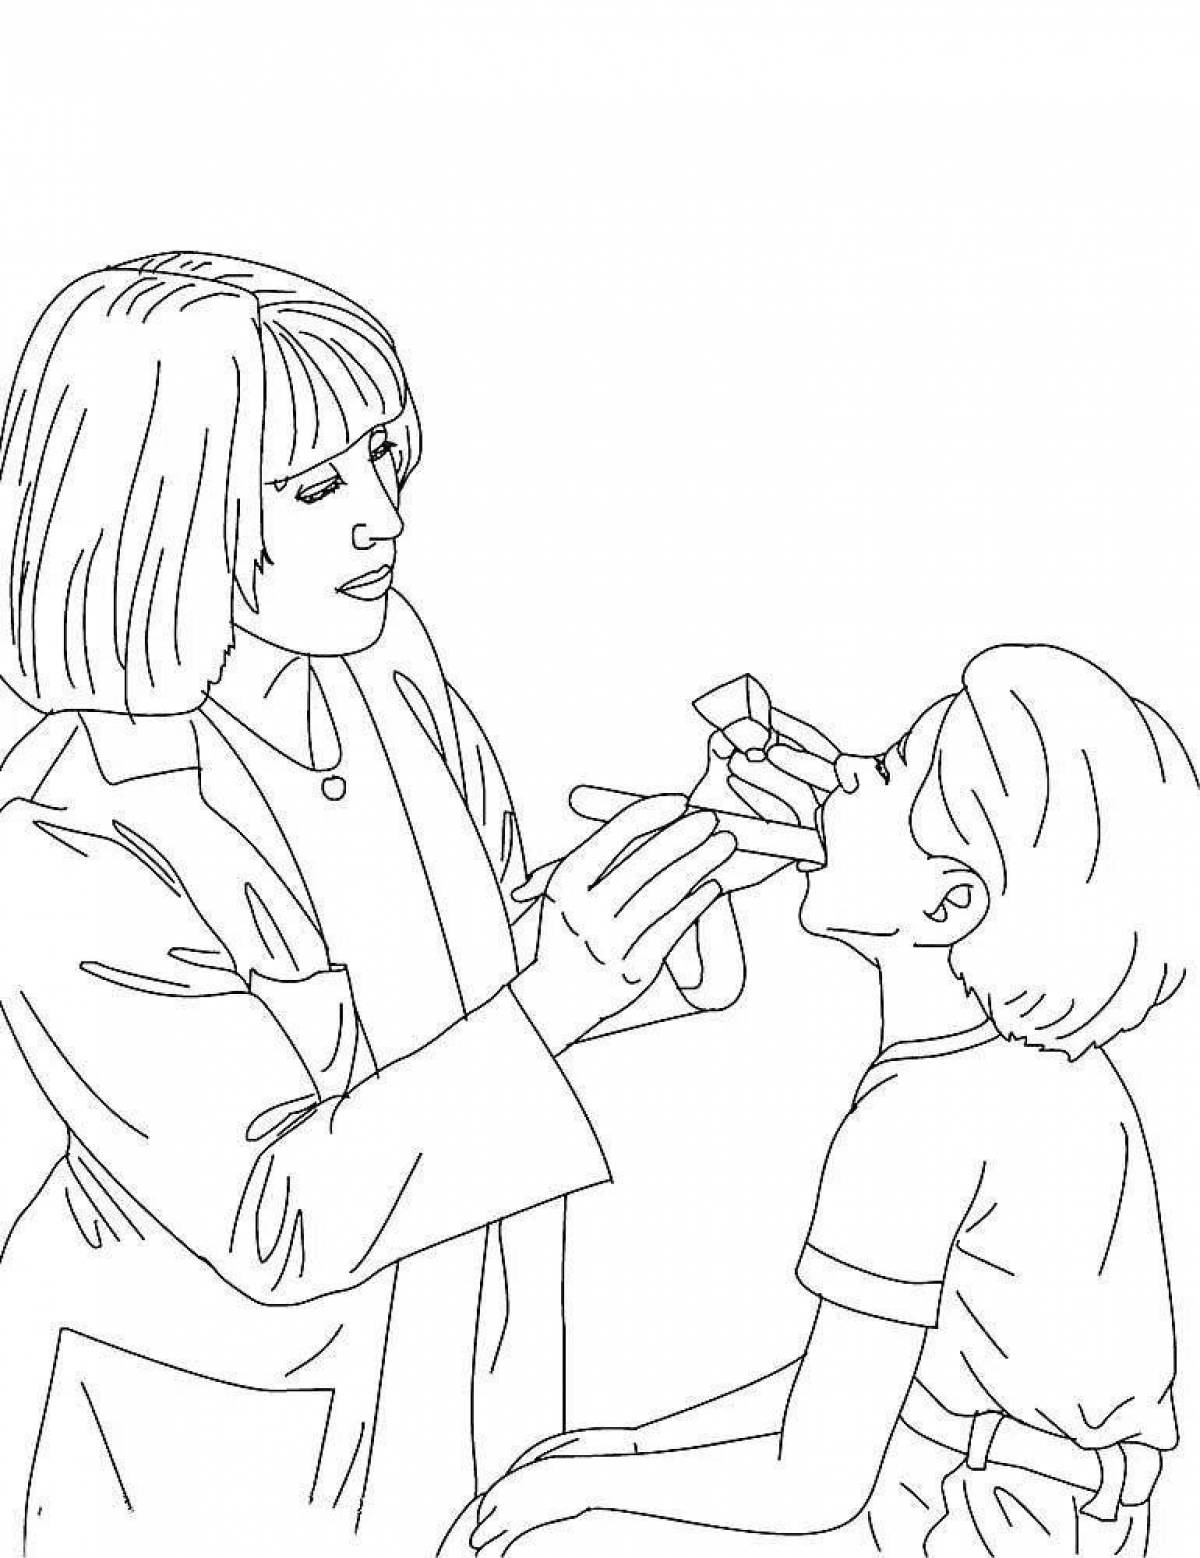 Doctor profession coloring page live